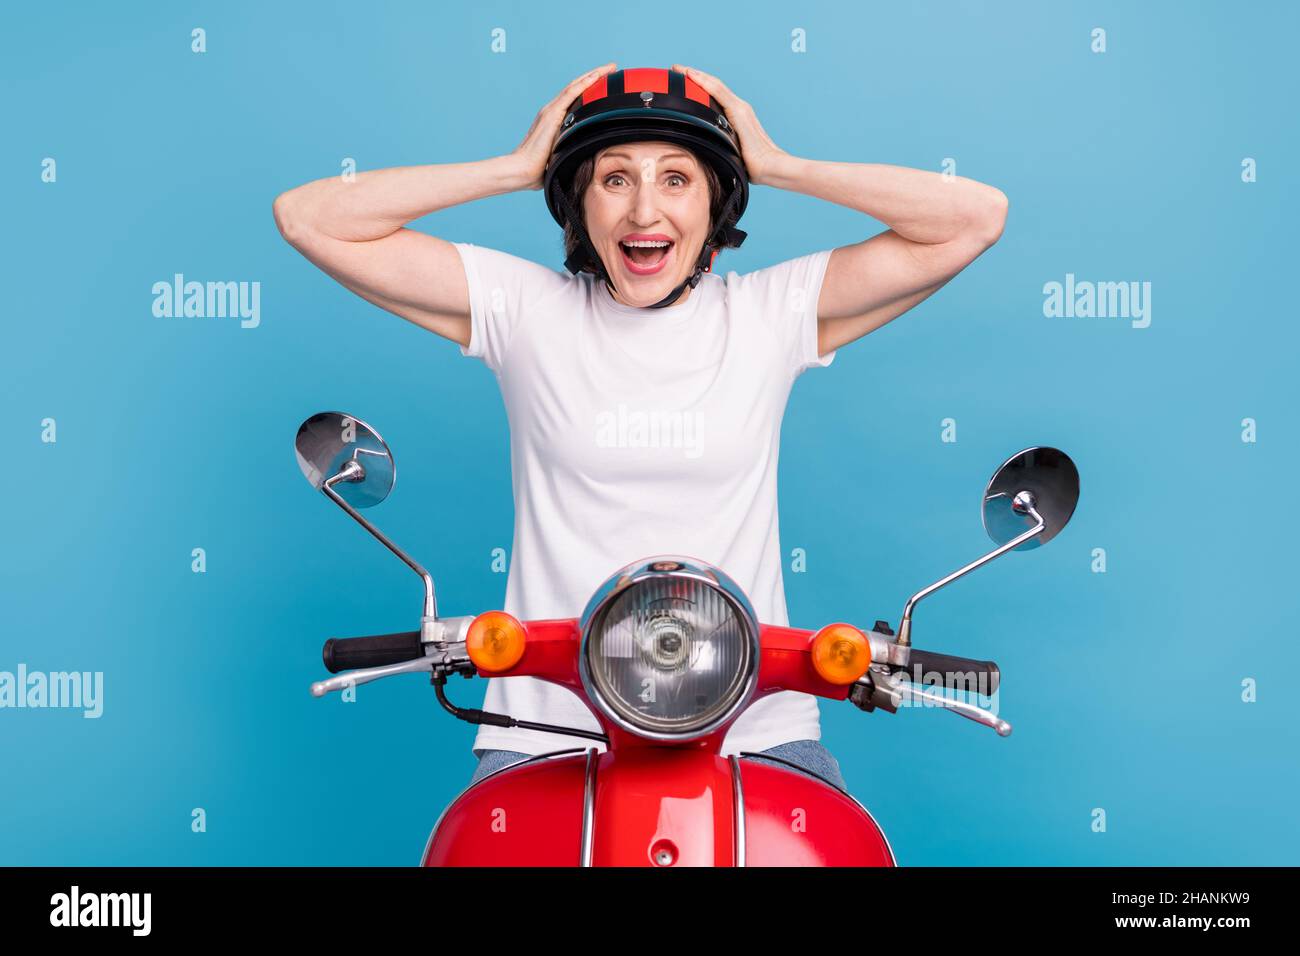 Portrait of attractive amazed cheerful woman riding moped sale reaction isolated over bright blue color background Stock Photo